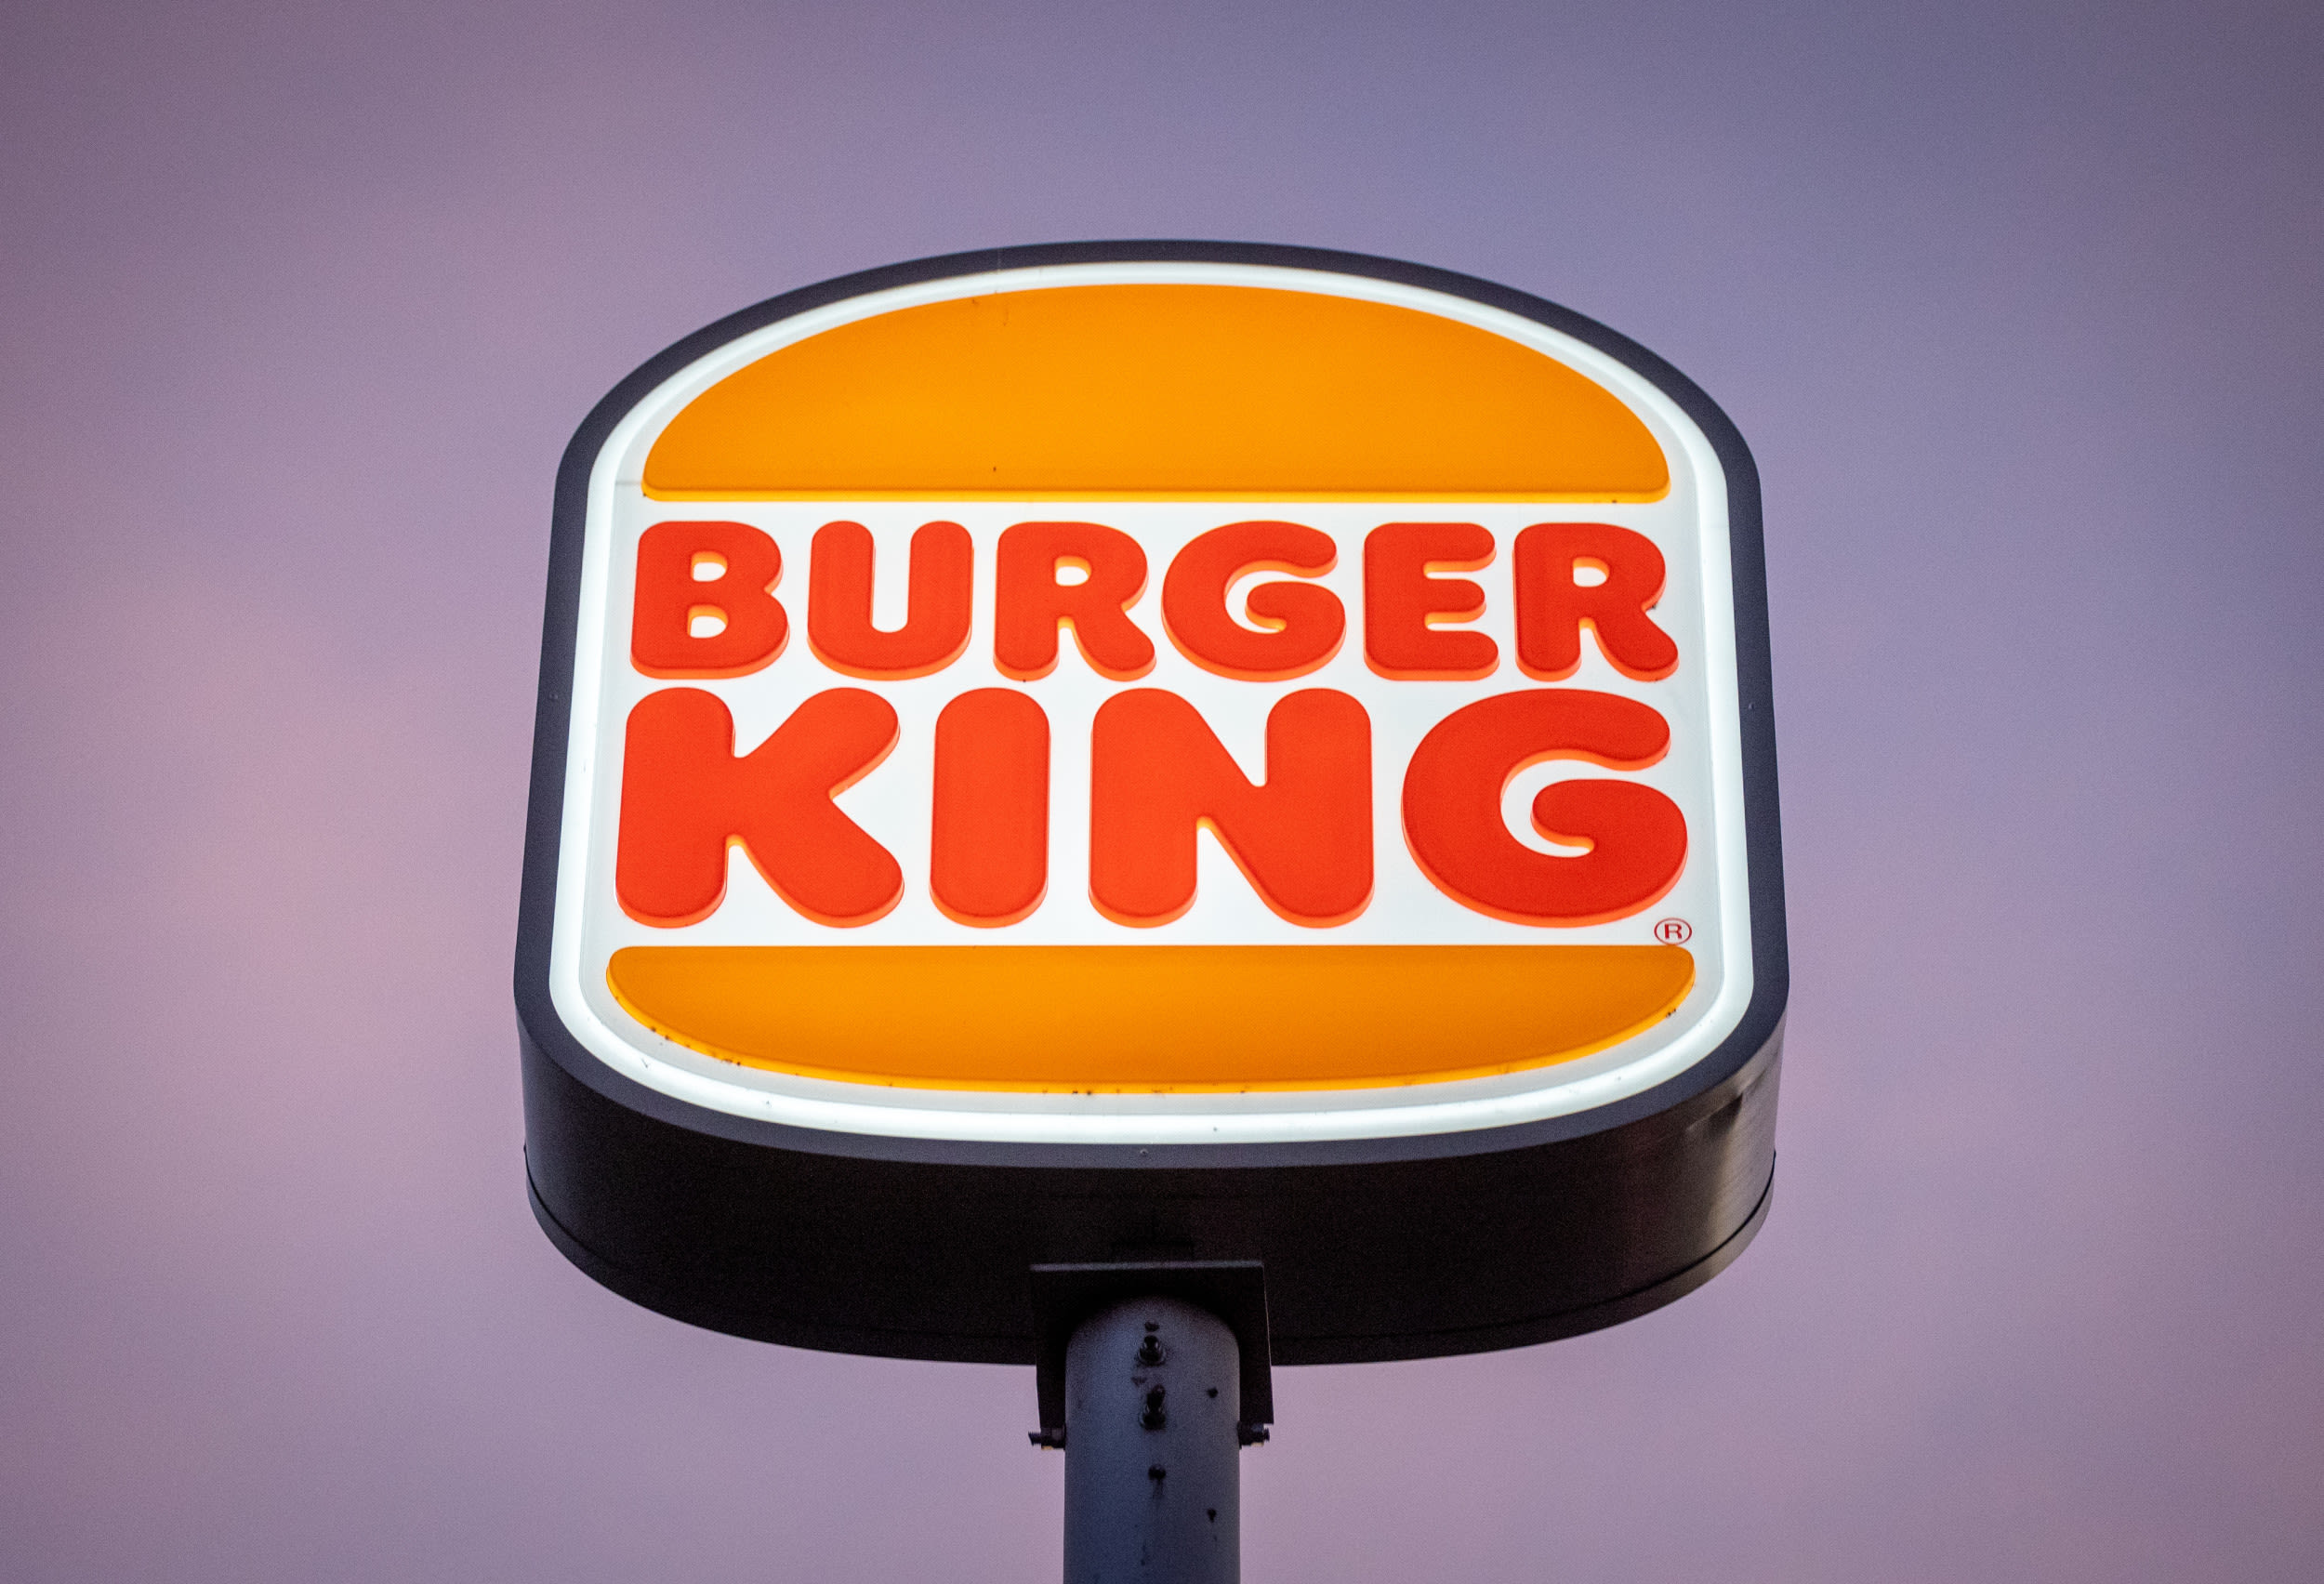 Burger King vs. McDonald's: which is best value $5 meal deal?